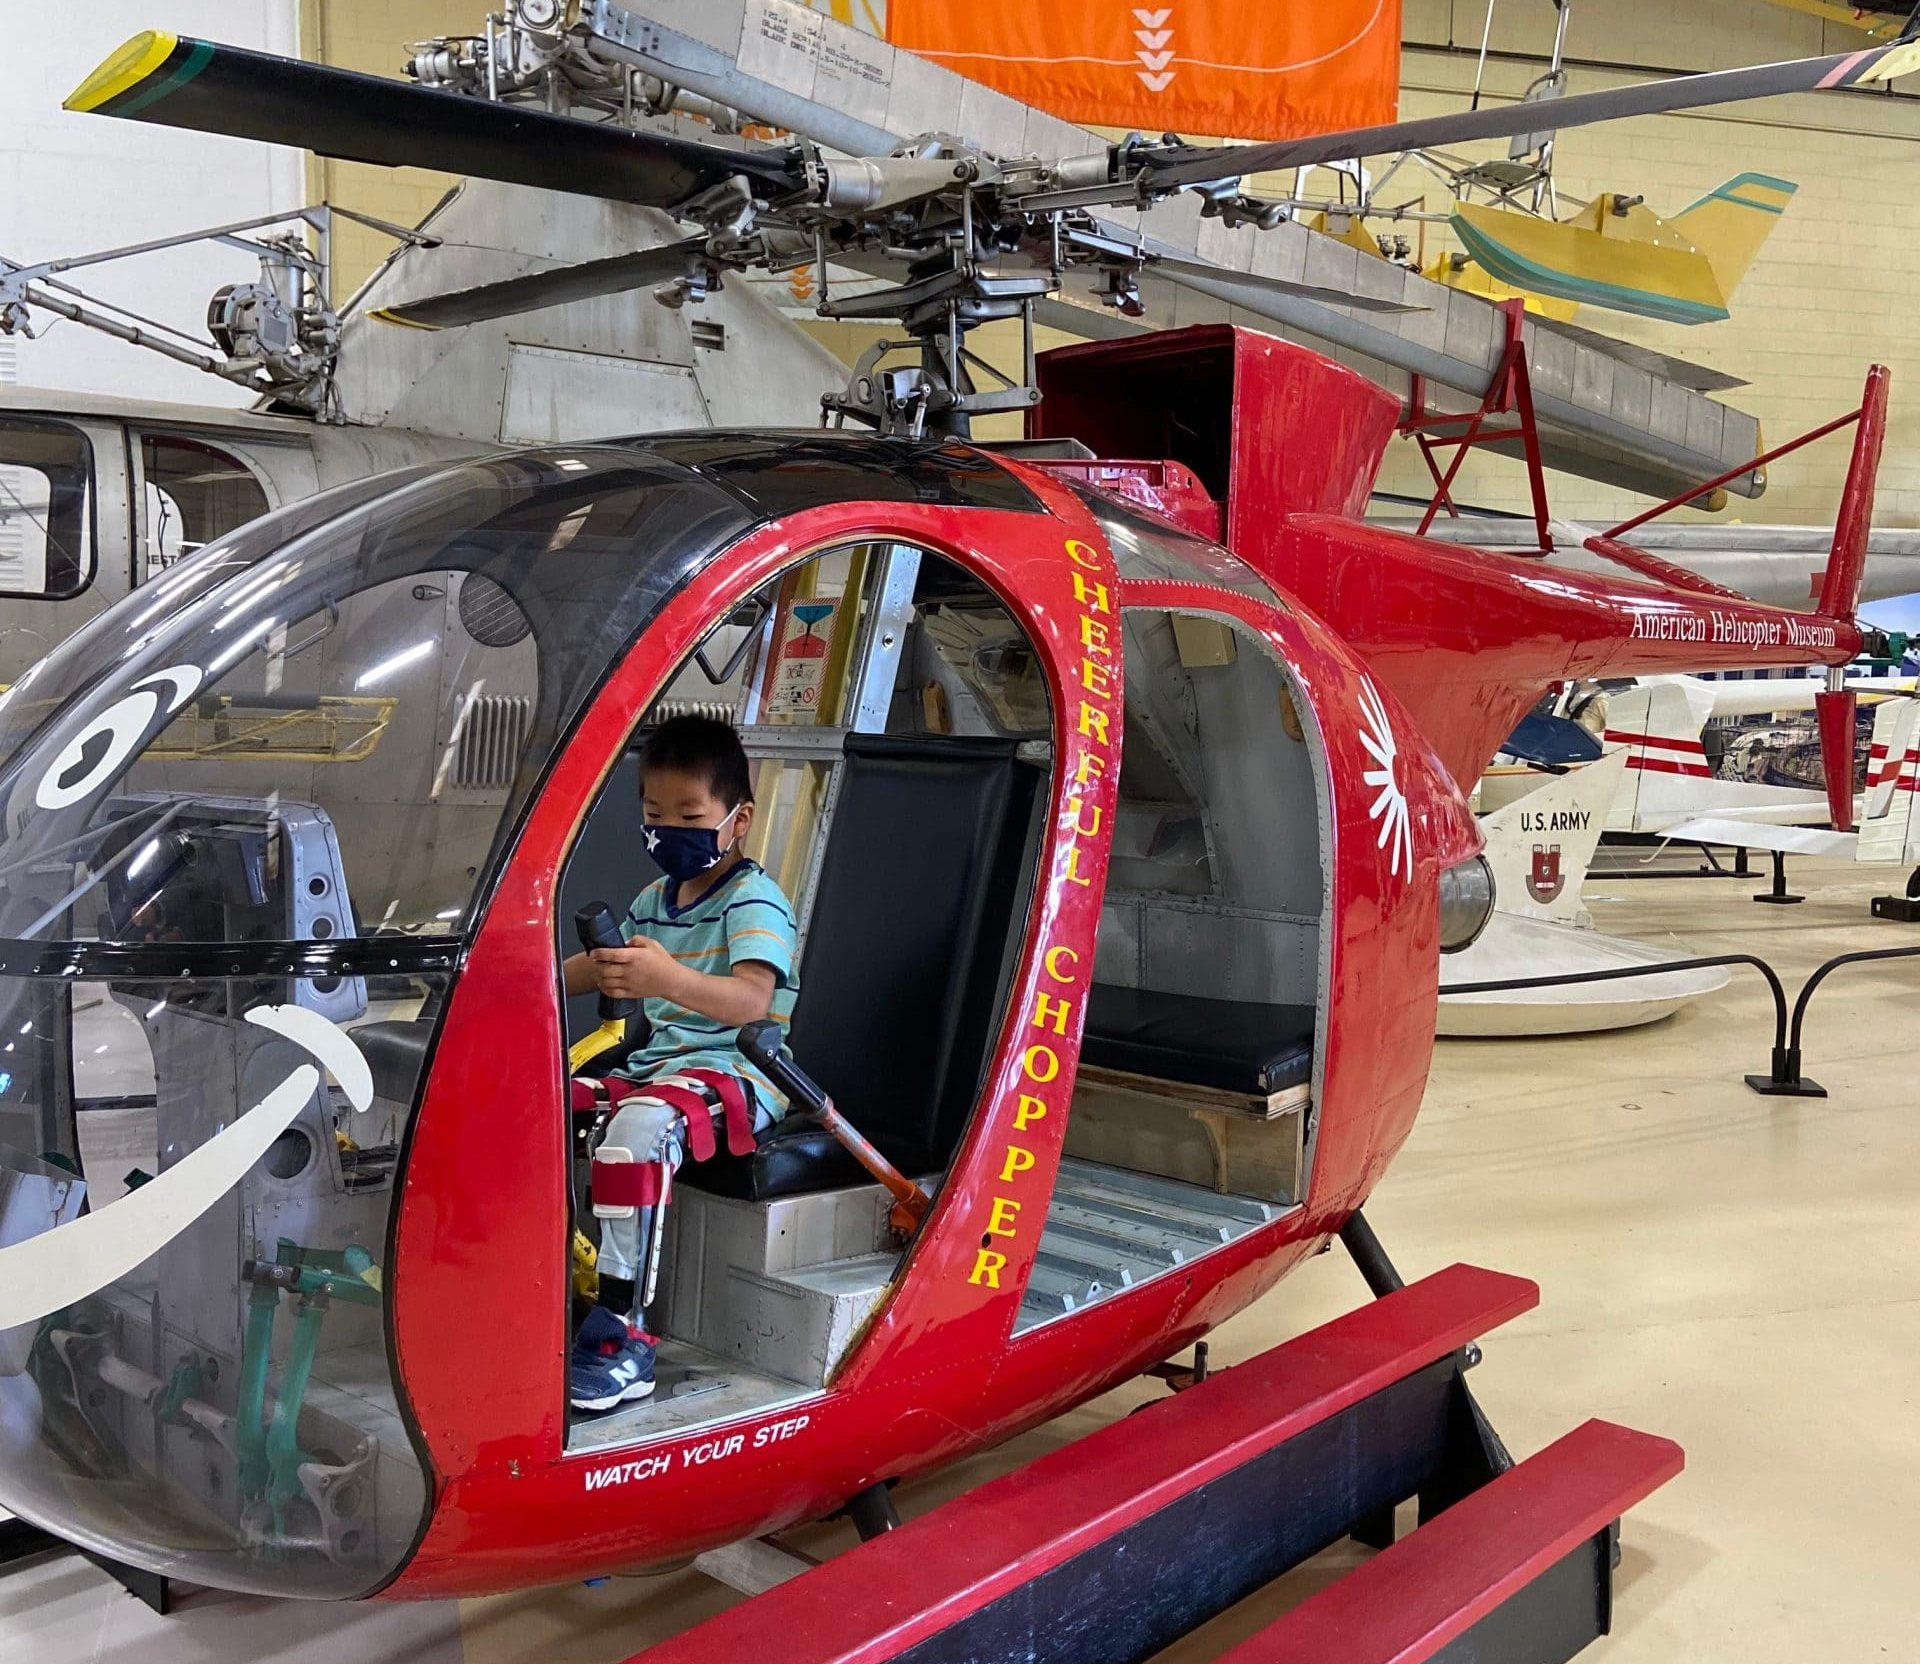 Kid in an helicopter at the American Helicopter museum